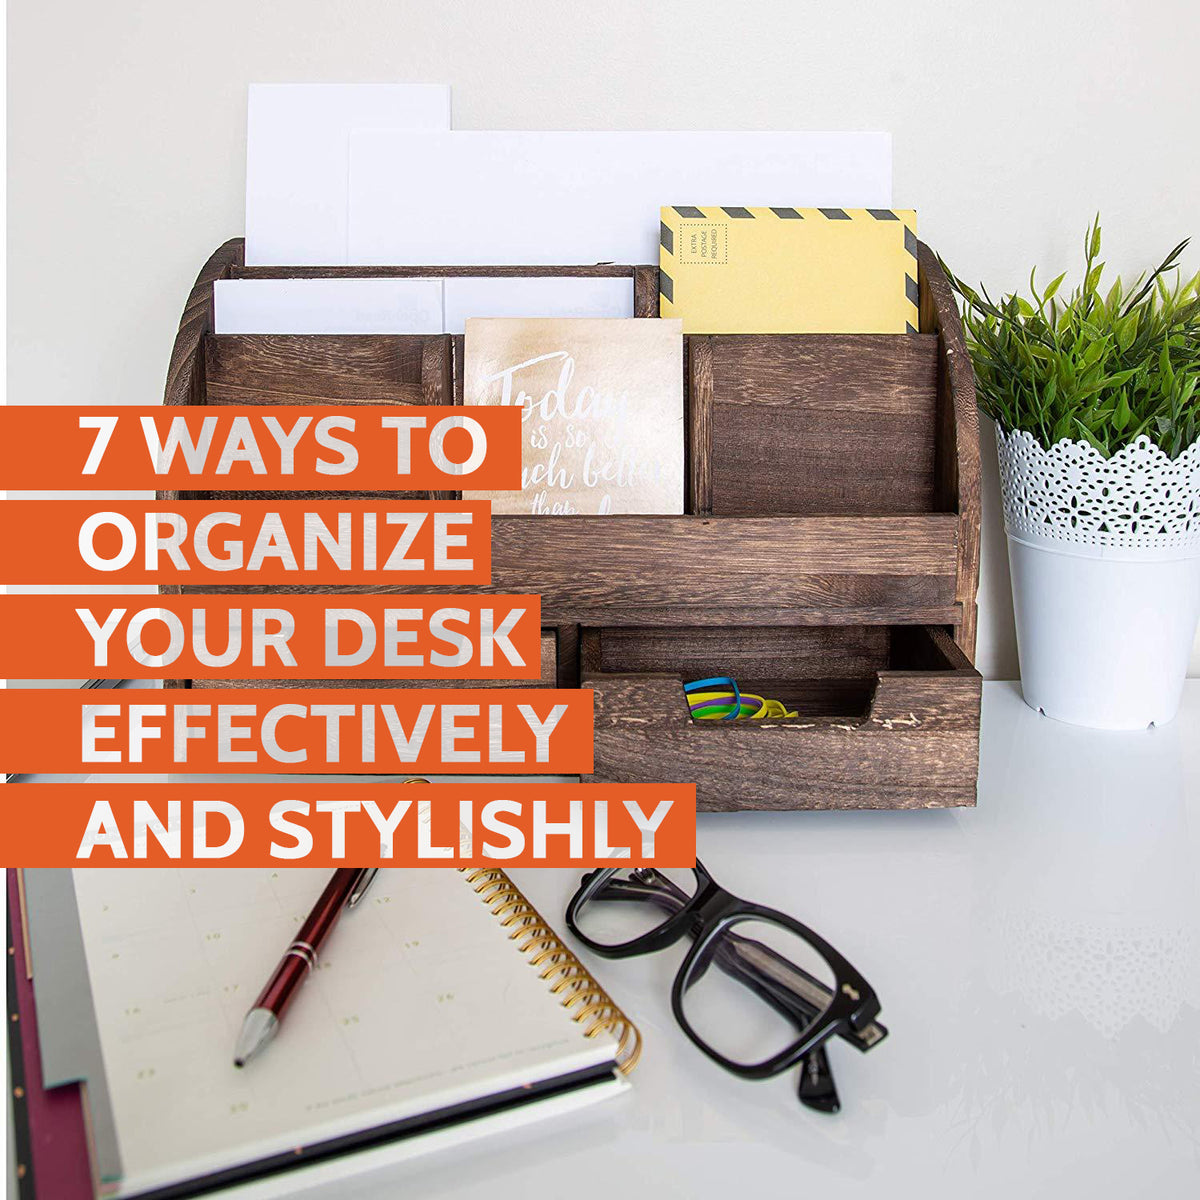 7 Ways to organize your desk effectively and stylishly– Comfify